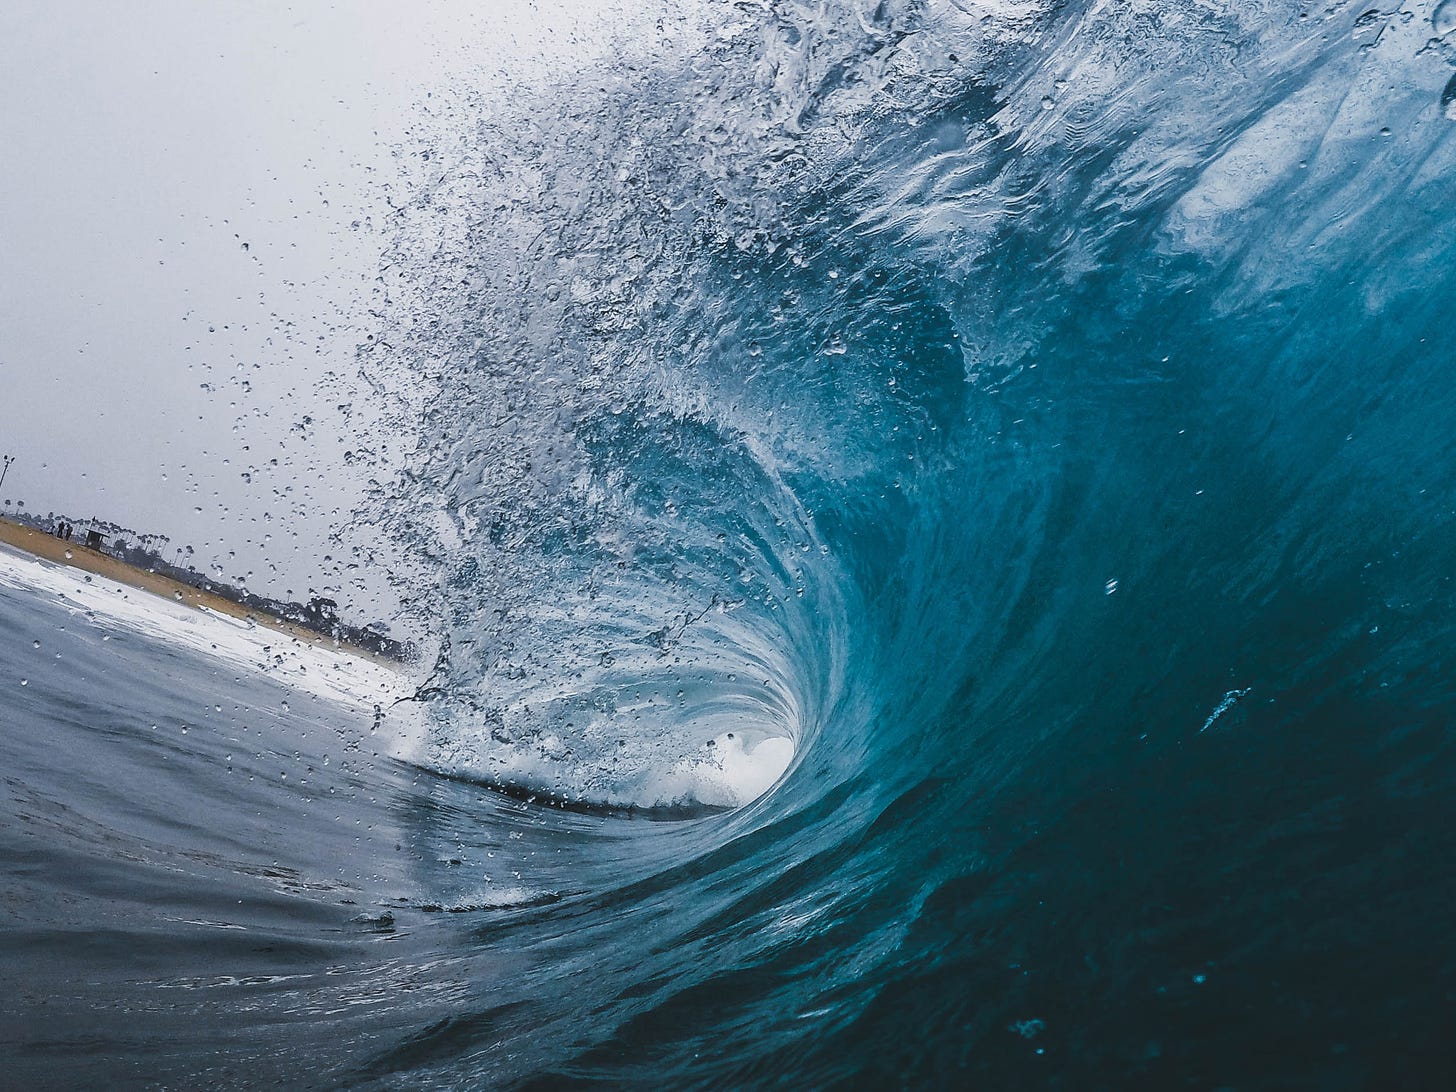 Underneath a cresting wave